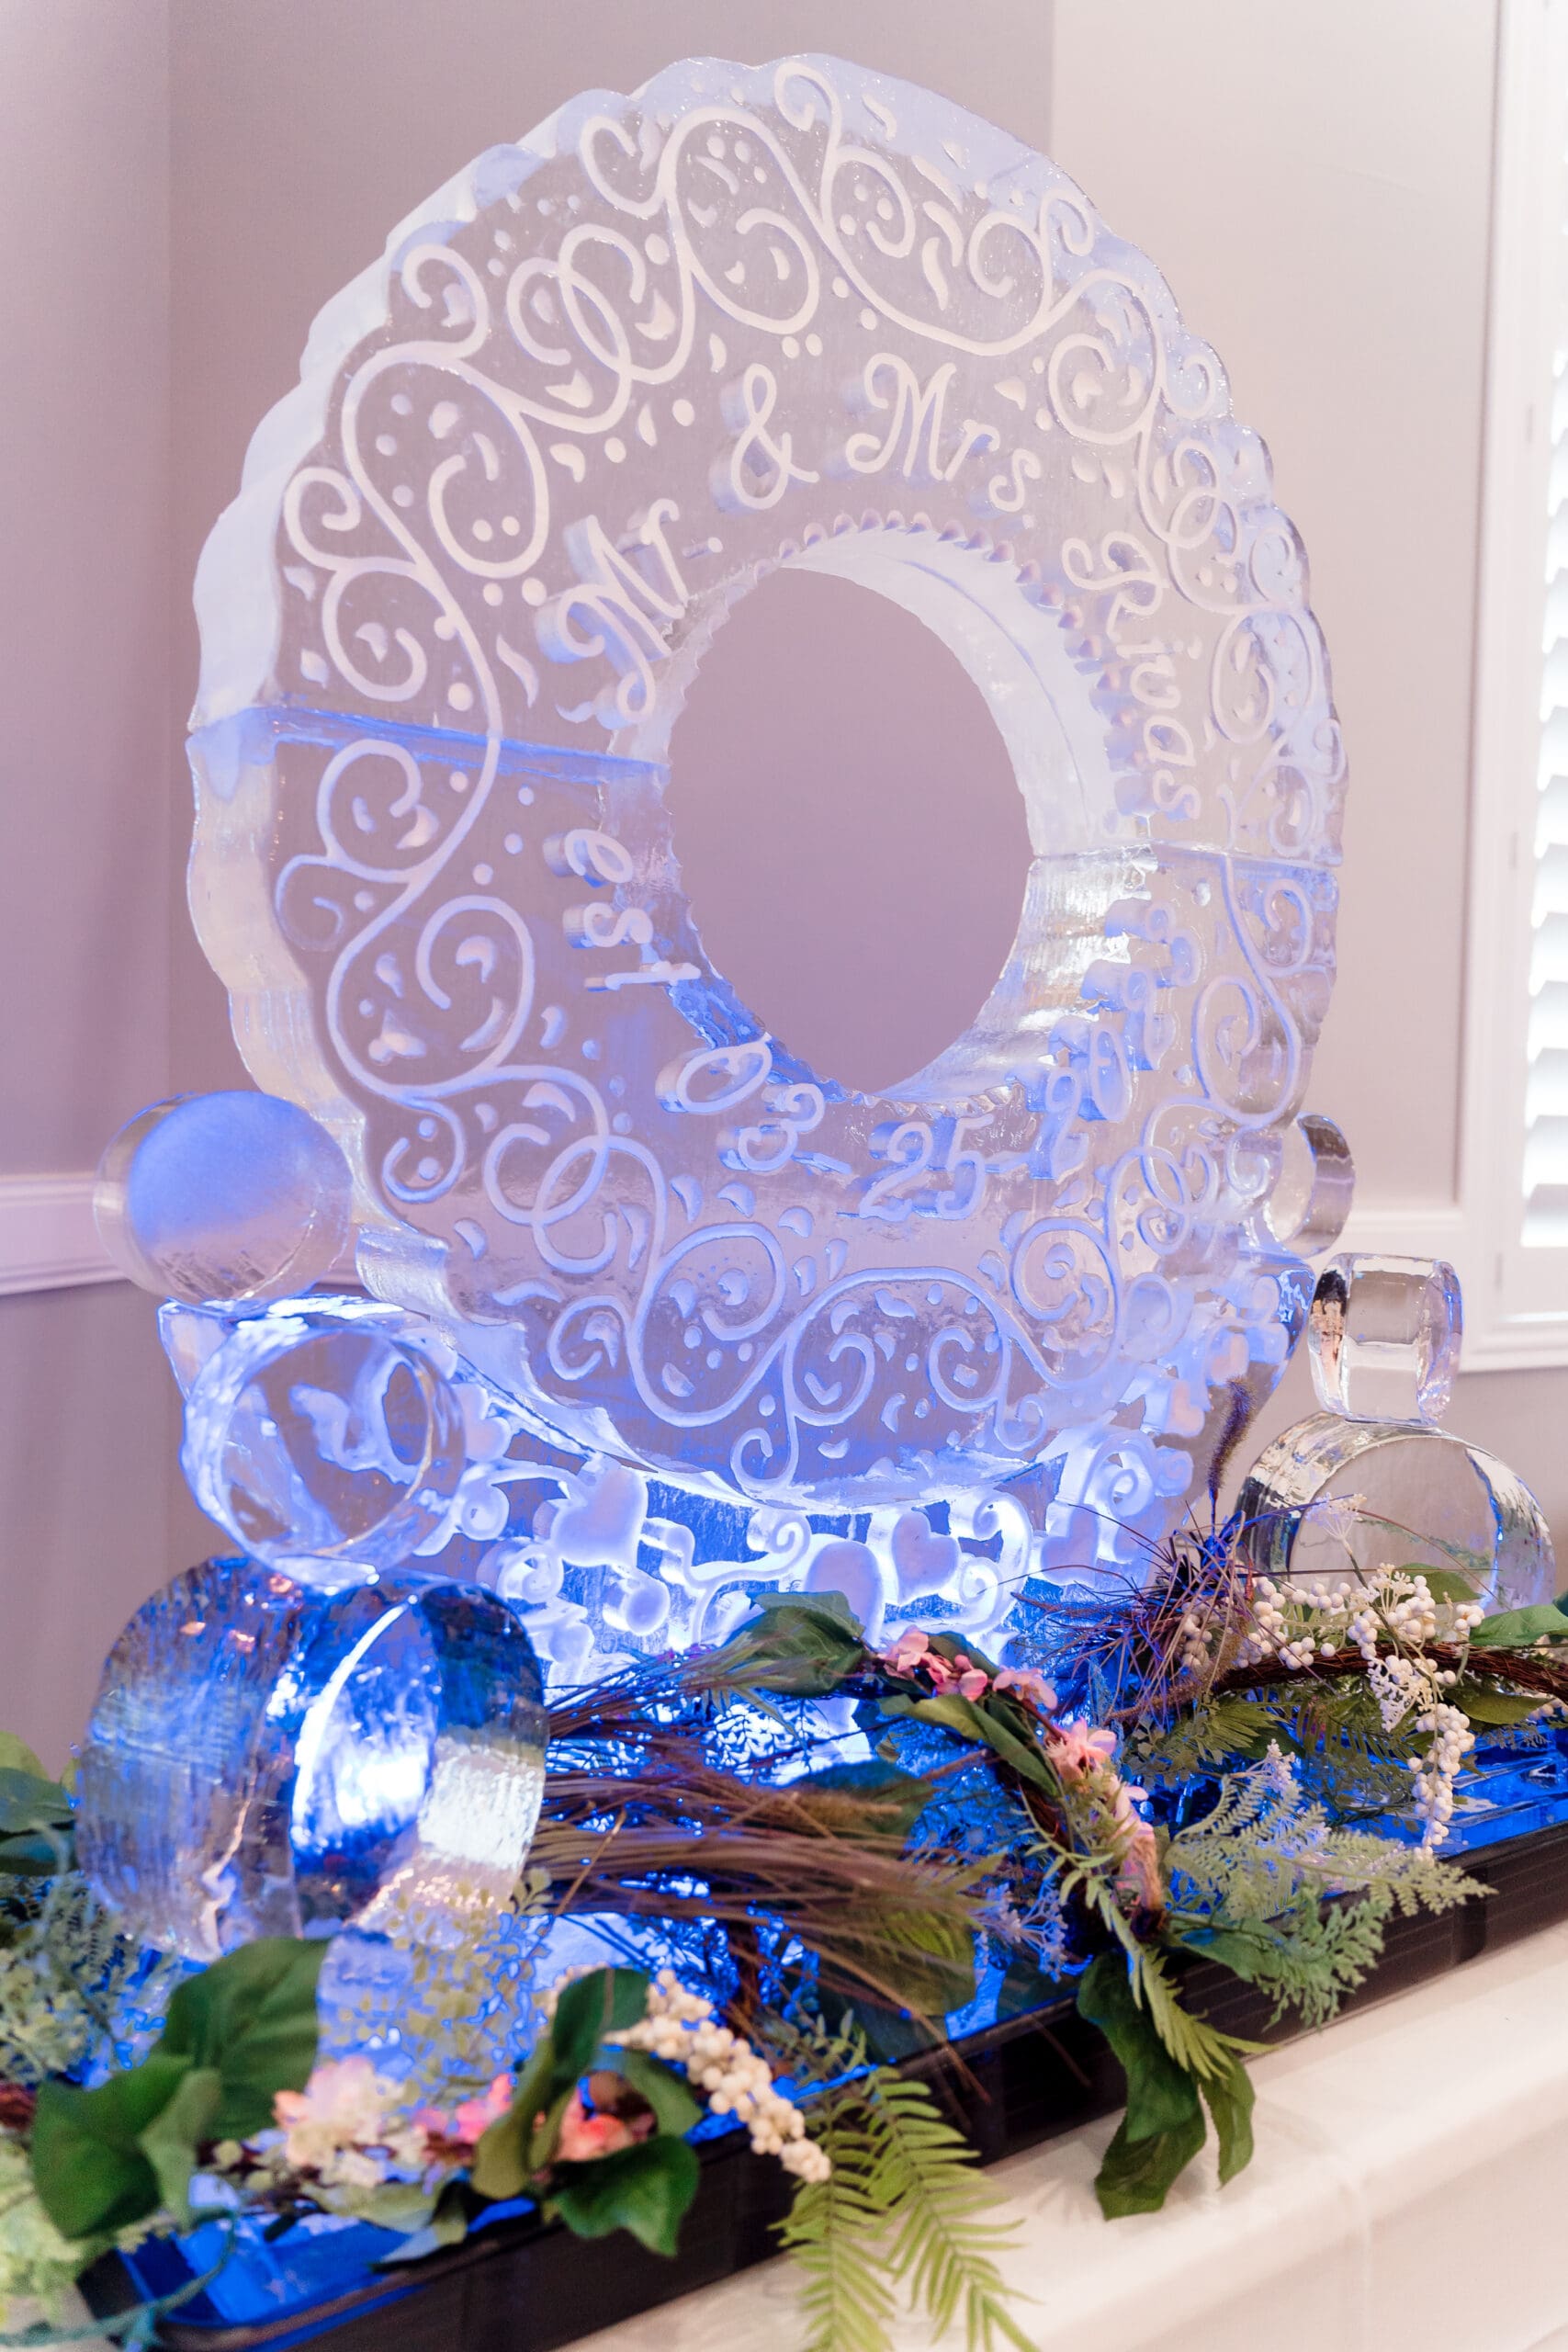 Decorative Ice Carving with "Mr. and Mrs. Rivas" at Island Grove Recreation Center